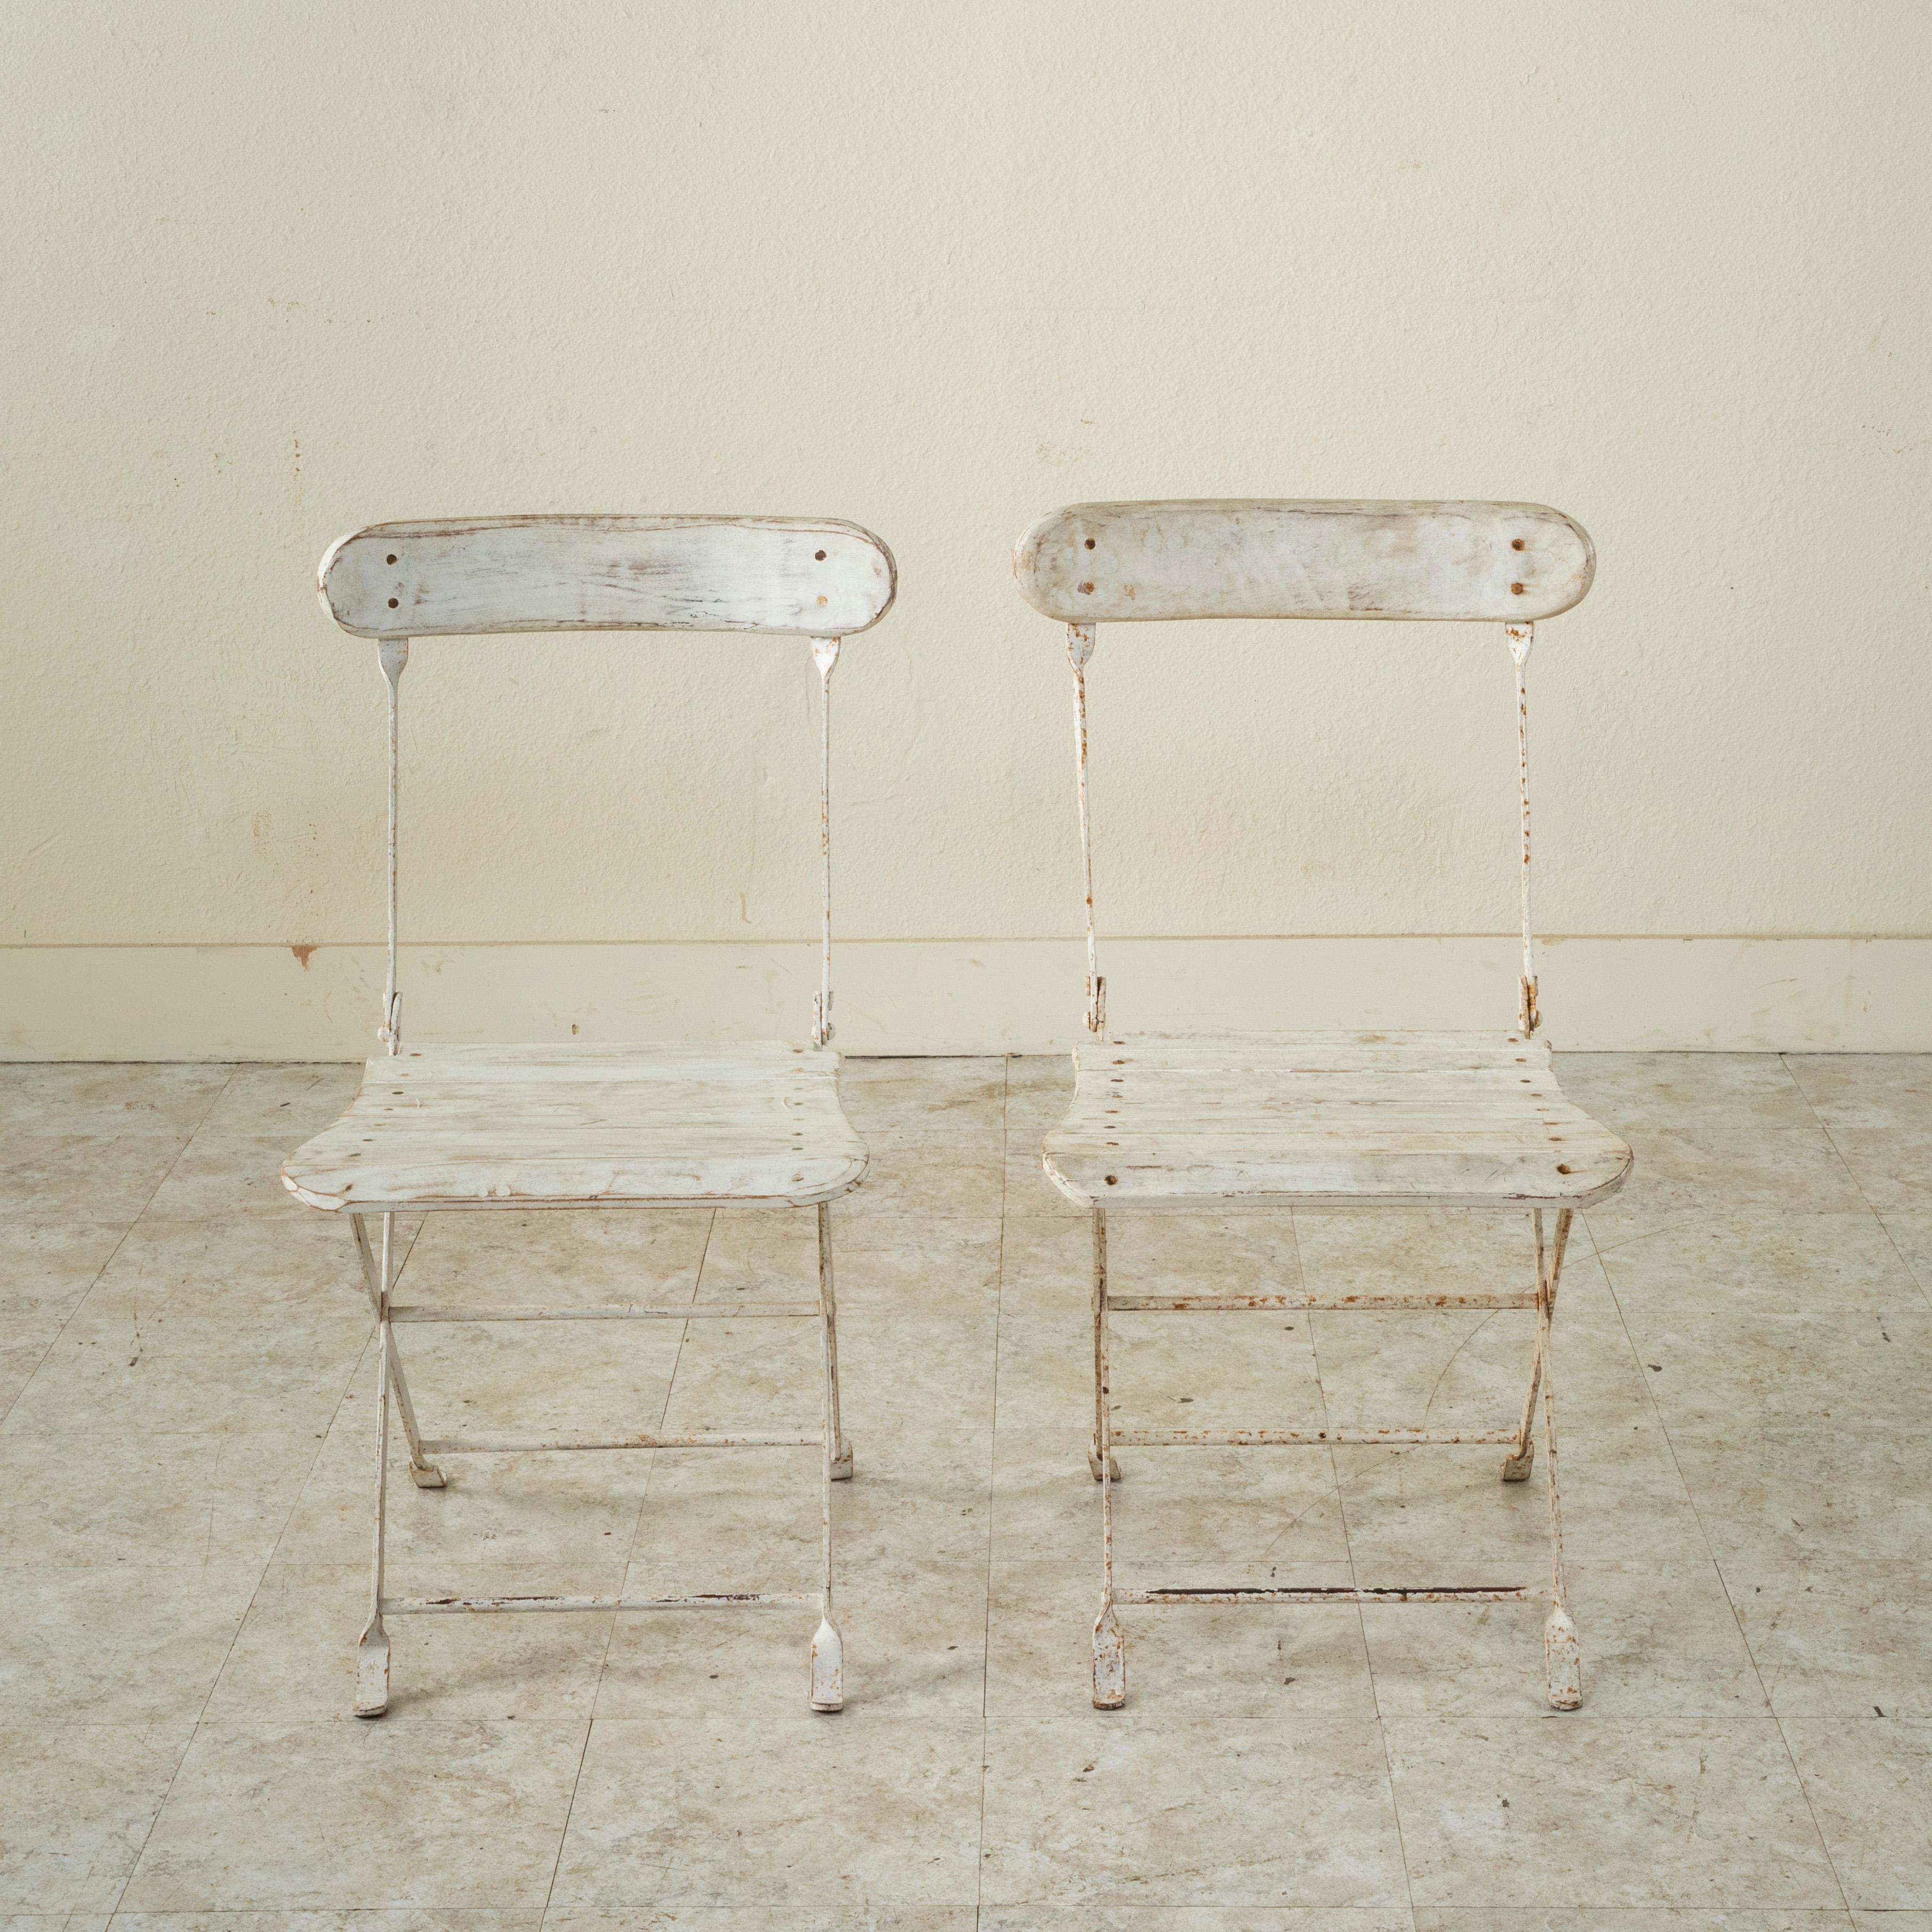 This pair of Mid-twentieth Century French iron garden chairs feature wood slats on the seats and backs and are painted white. The chairs fold flat for easy storing, circa 1950. Five pairs available.